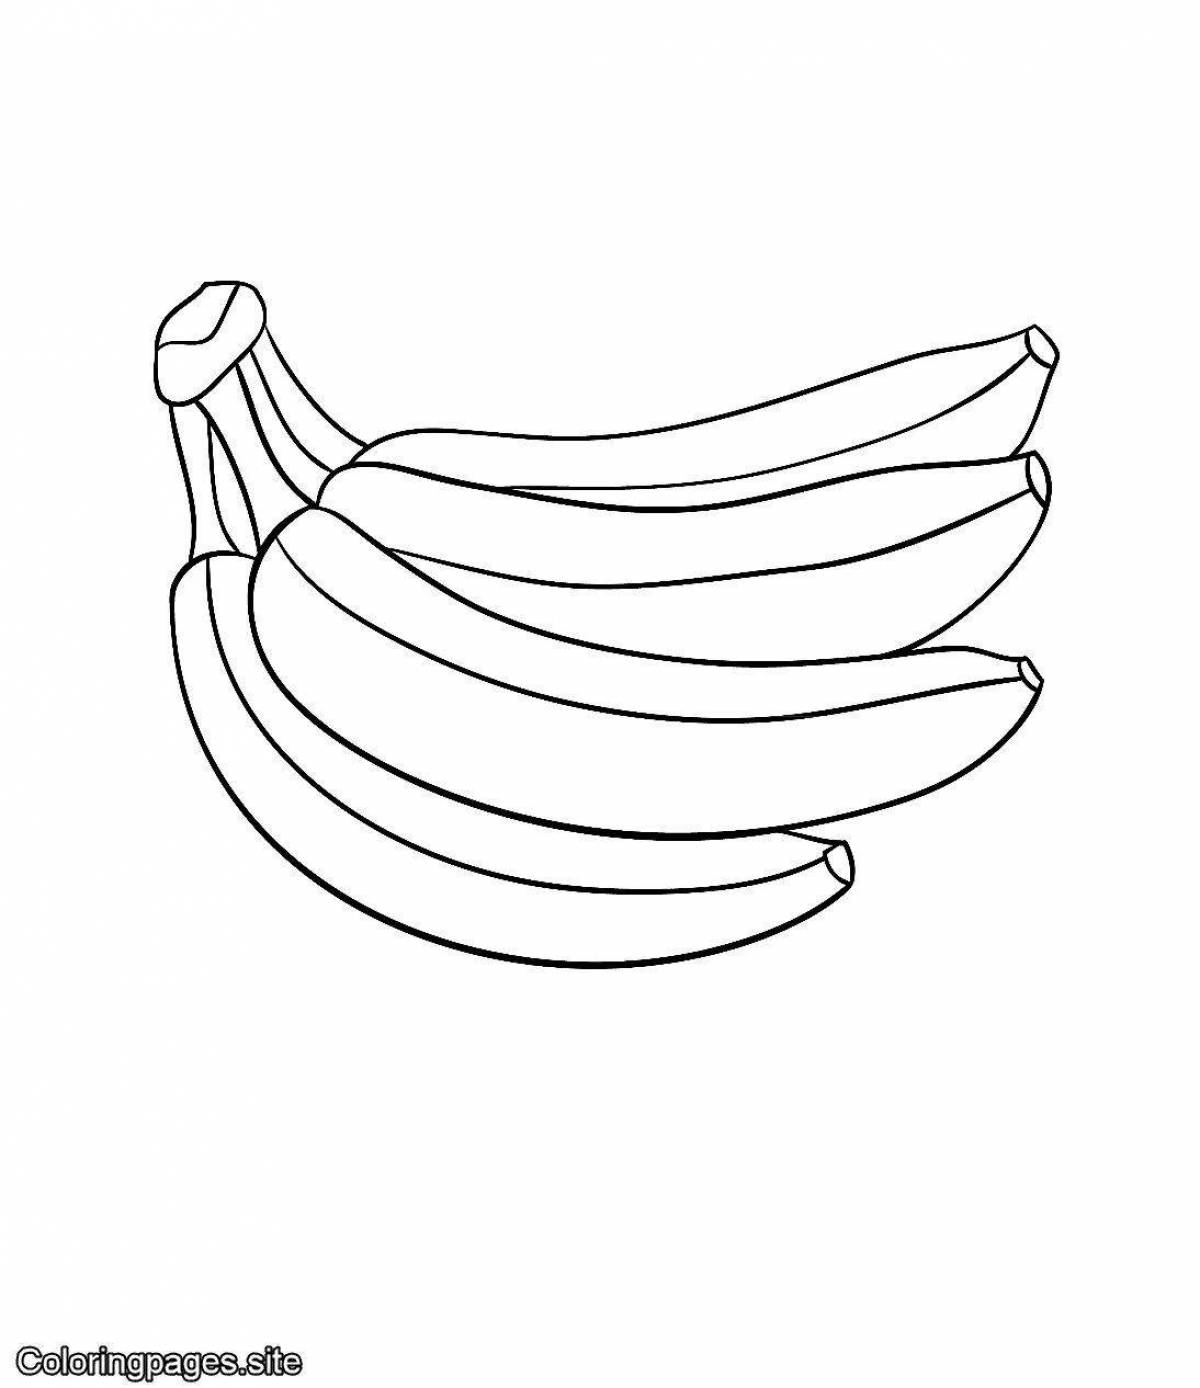 Coloring bananas with colored splashes for children 2-3 years old